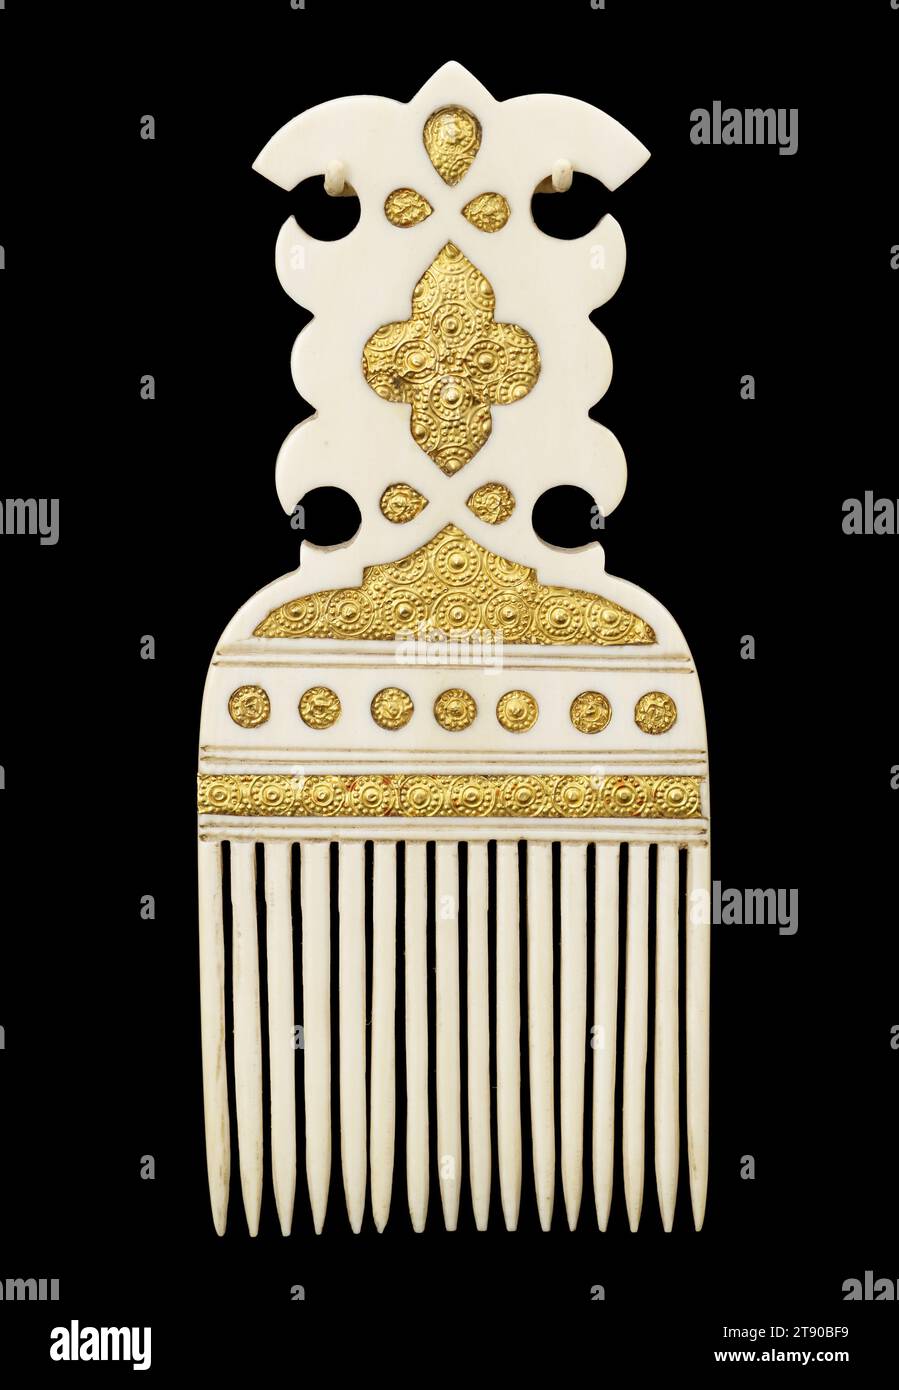 Hair comb, about 1800, 4 15/16 x 2 1/8 x 1/4 in. (12.5 x 5.4 x 0.64 cm), Ivory, gold, Tanzania, 18th-19th century, Whoever gave this comb to his wife more than 200 years ago must have loved her dearly. Carefully carved and made of precious materials (elephant ivory and gold folio), it’s something the owner would have shown off, perhaps even wearing it in her hair. It would signal that she was among the wealthy elite of Zanzibar, and had married well Stock Photo